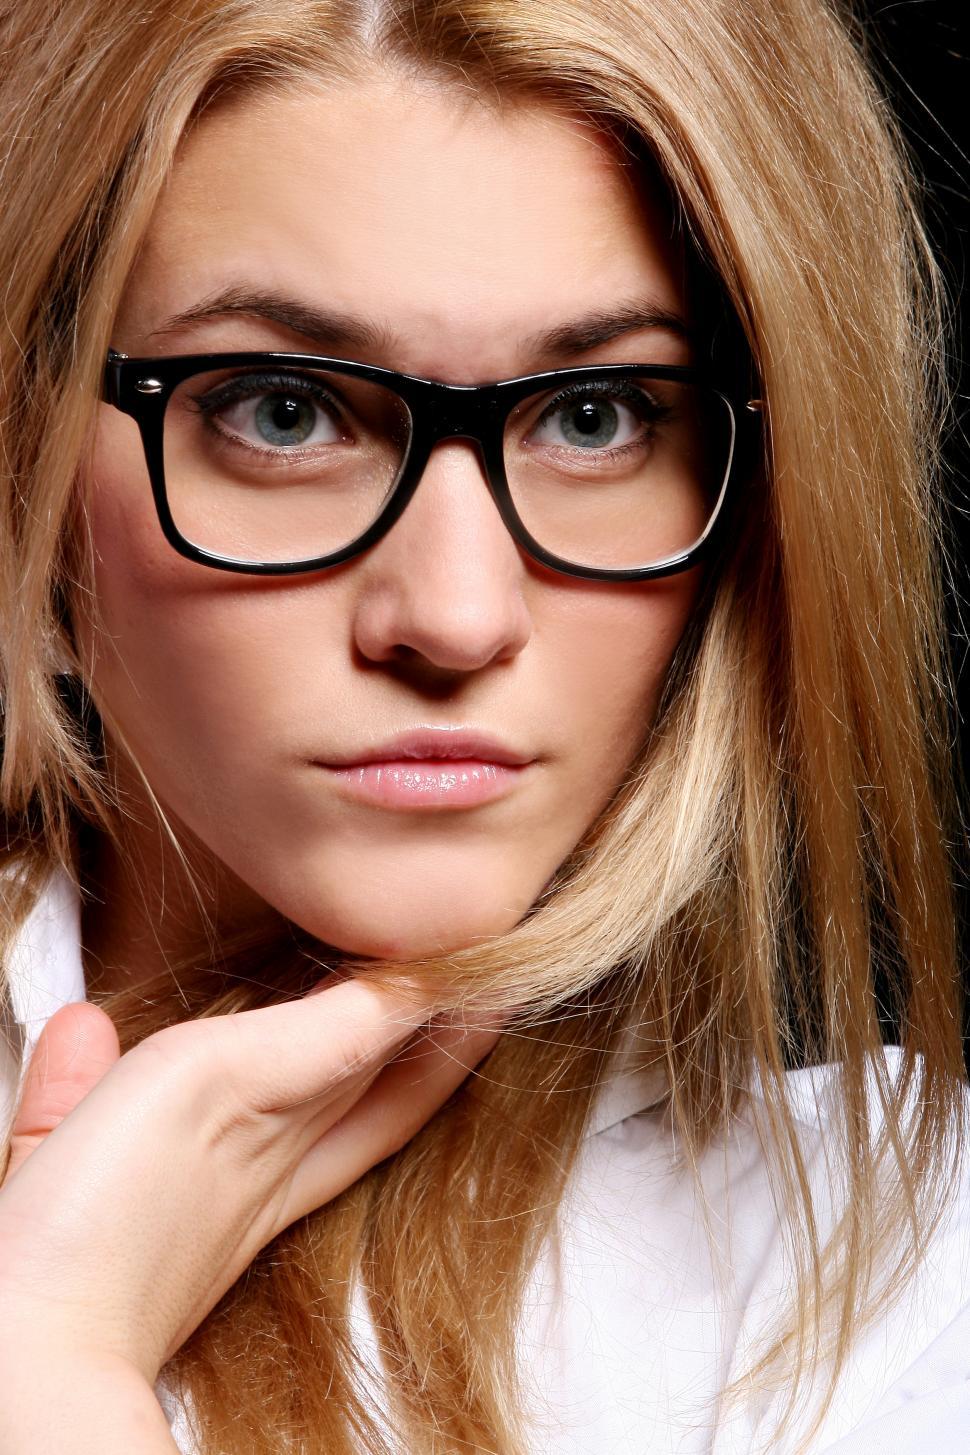 Free Image of Woman in glasses, looking at camera 